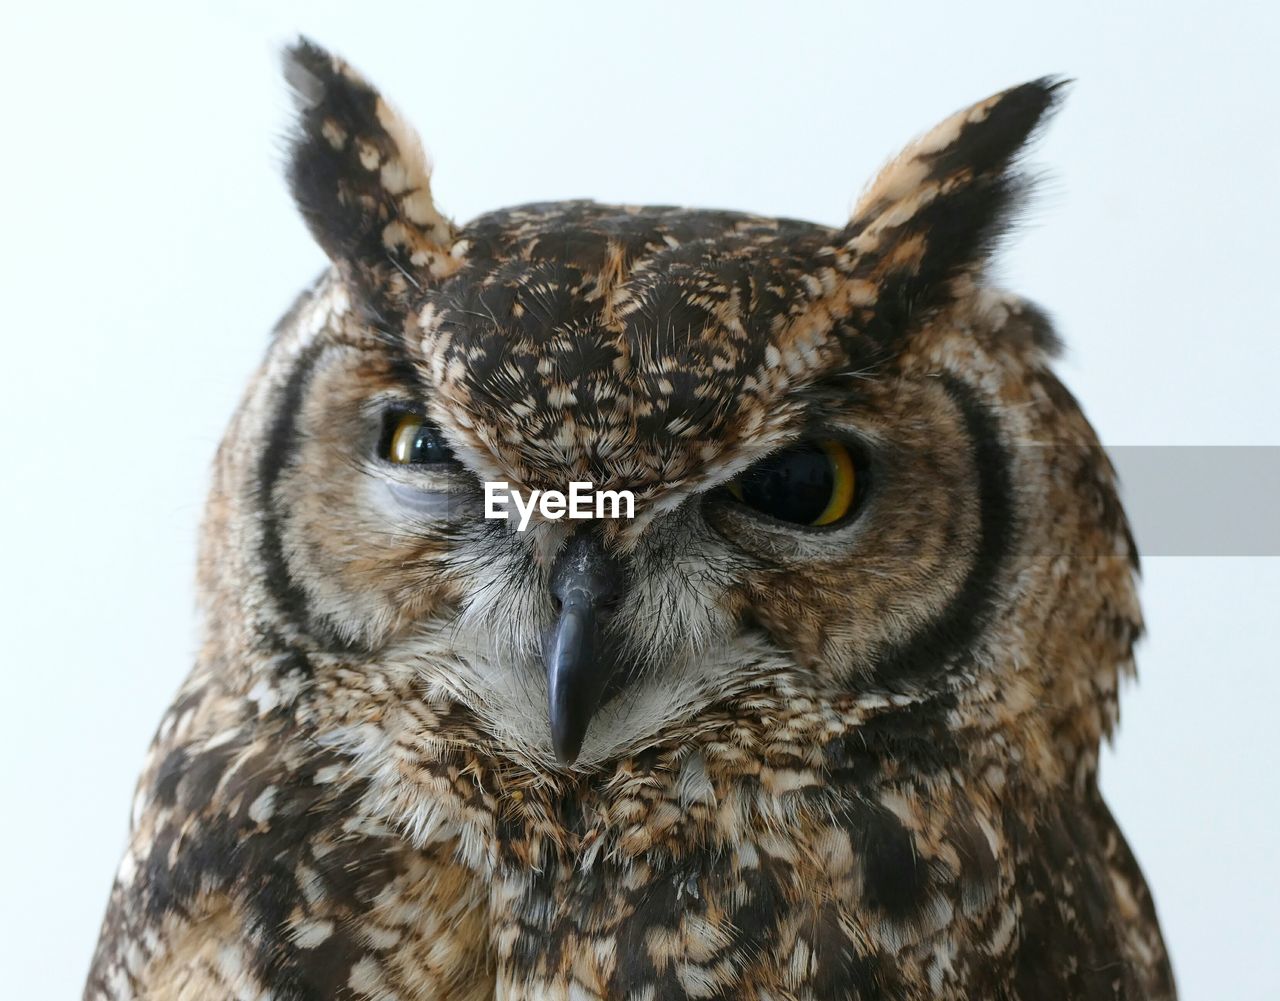 Close-up of great horned owl against white background